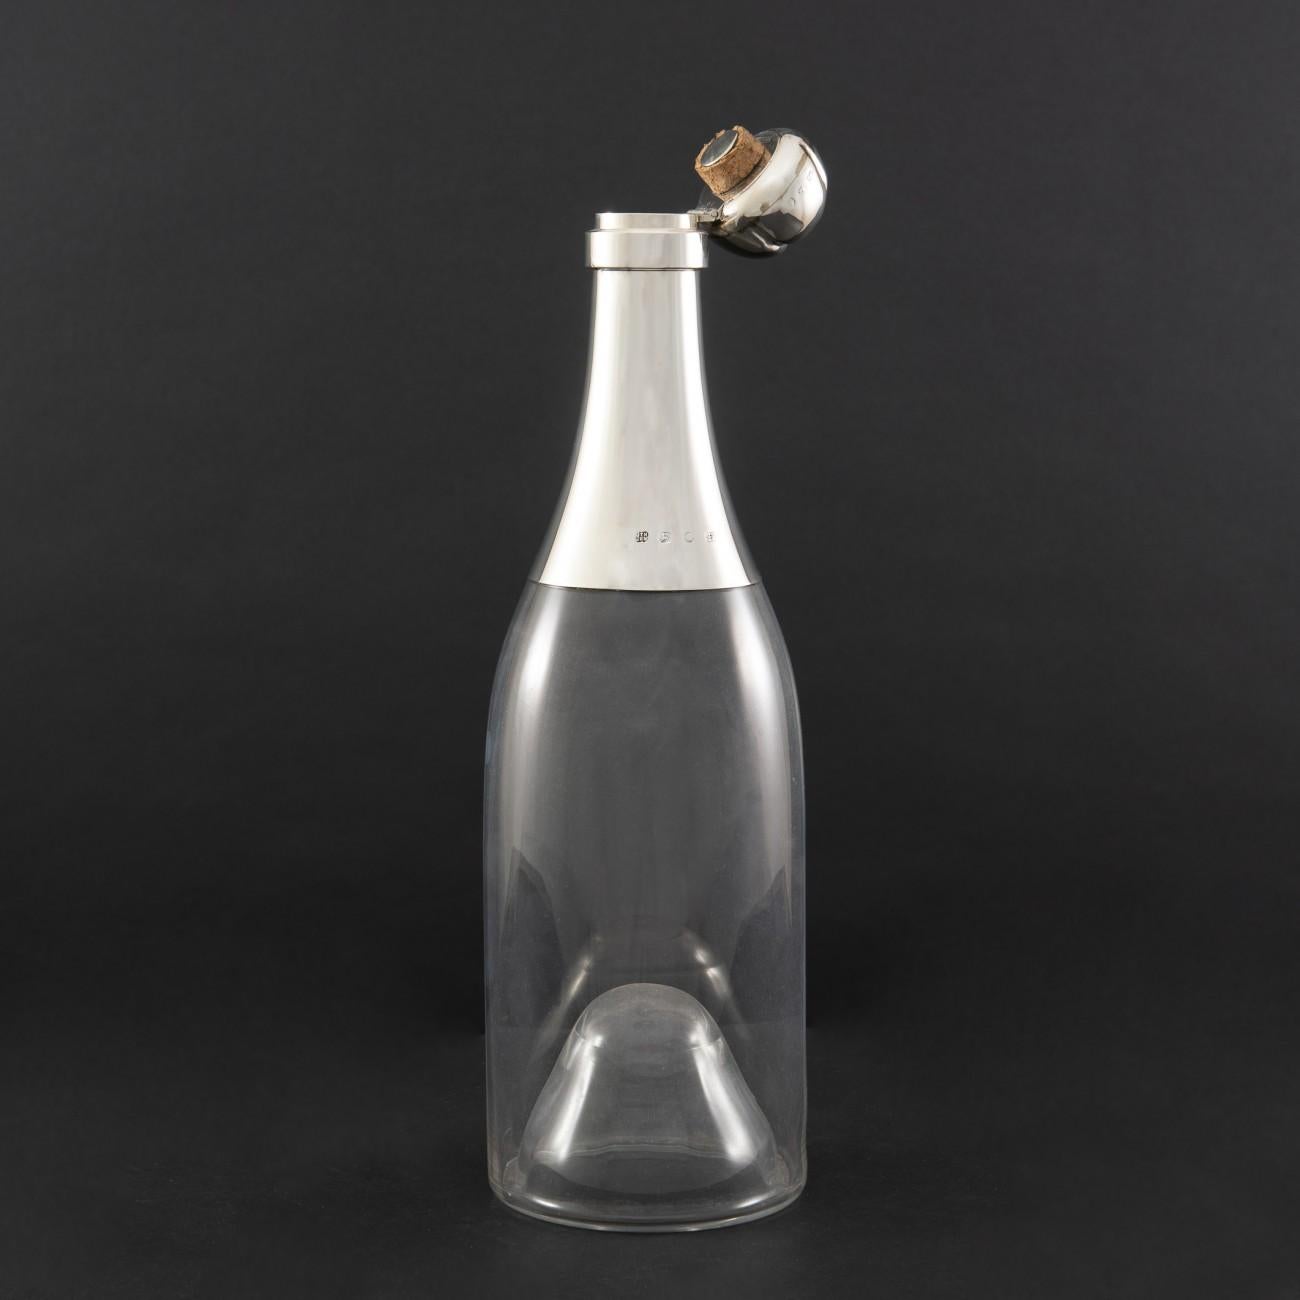 Wonderful champagne bottle decanter with a three bottle capacity. The glass body is fluted but in a truly elegant fashion, on the inside only; so that the outside surface of the decanter remains smooth. The silver neck and hinged stopper have